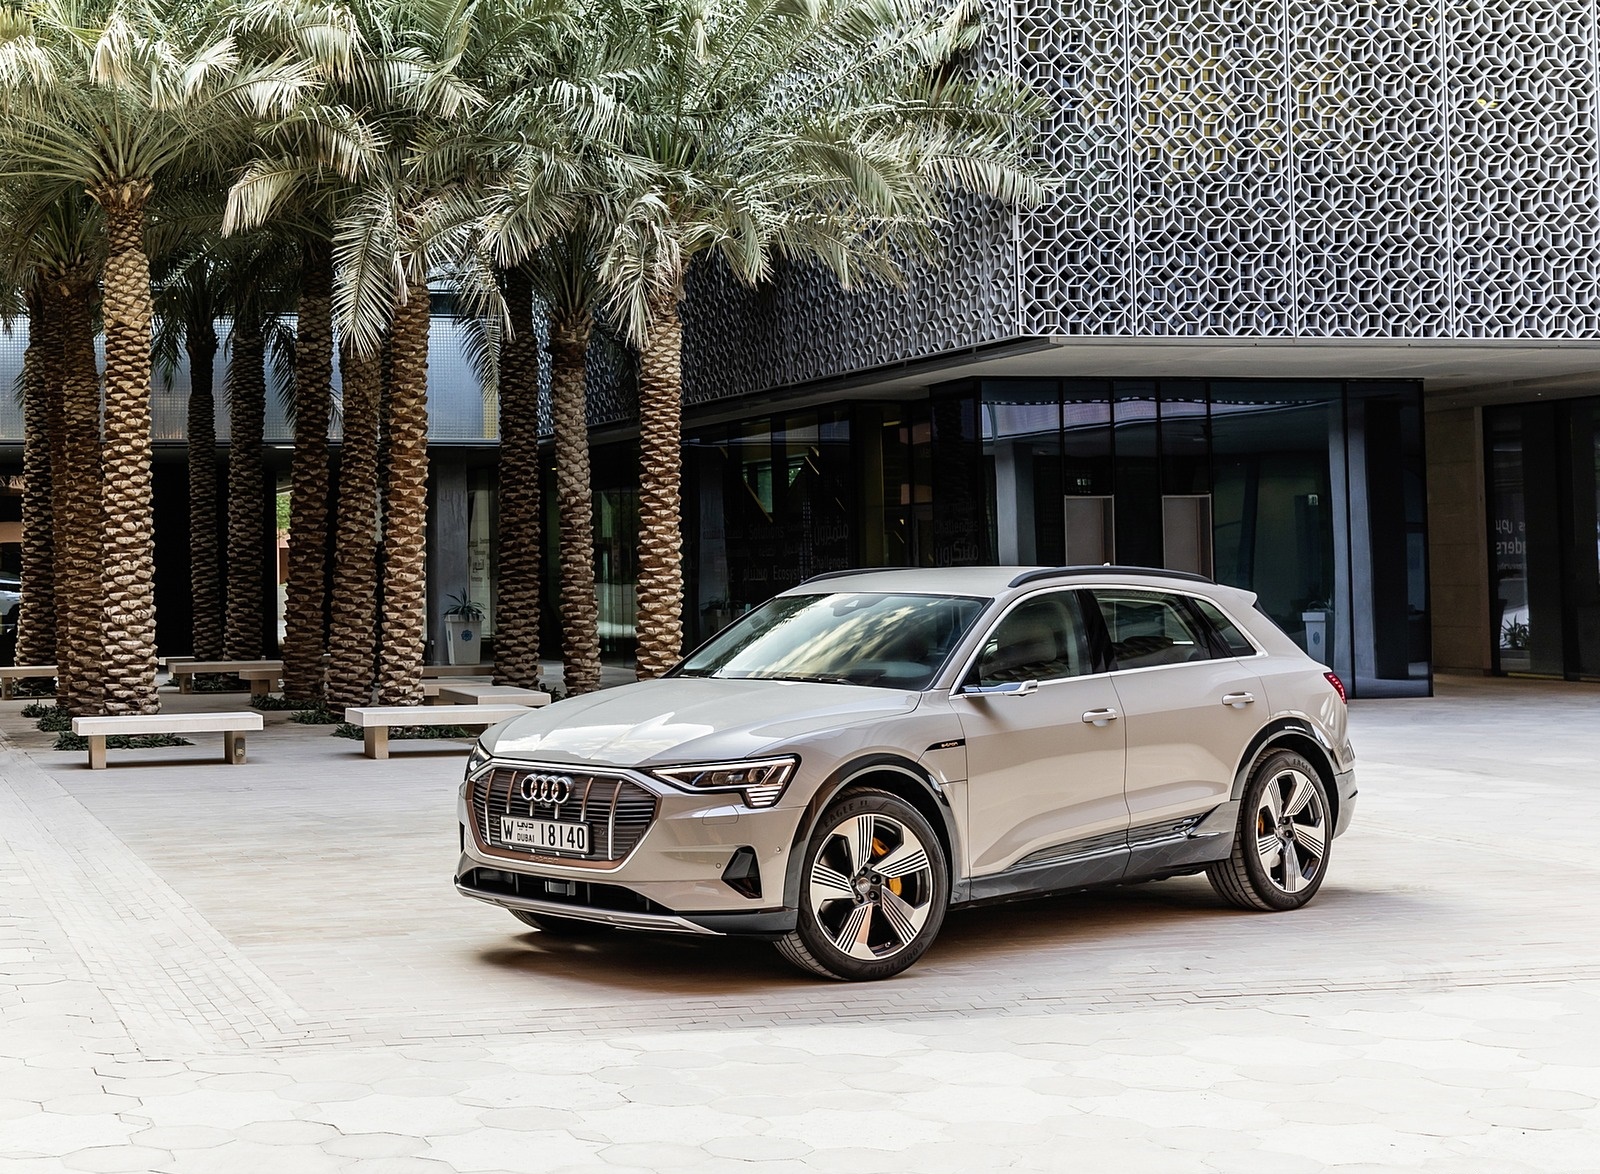 2019 Audi e-tron (Color: Siam Beige) Front Three-Quarter Wallpapers #175 of 234